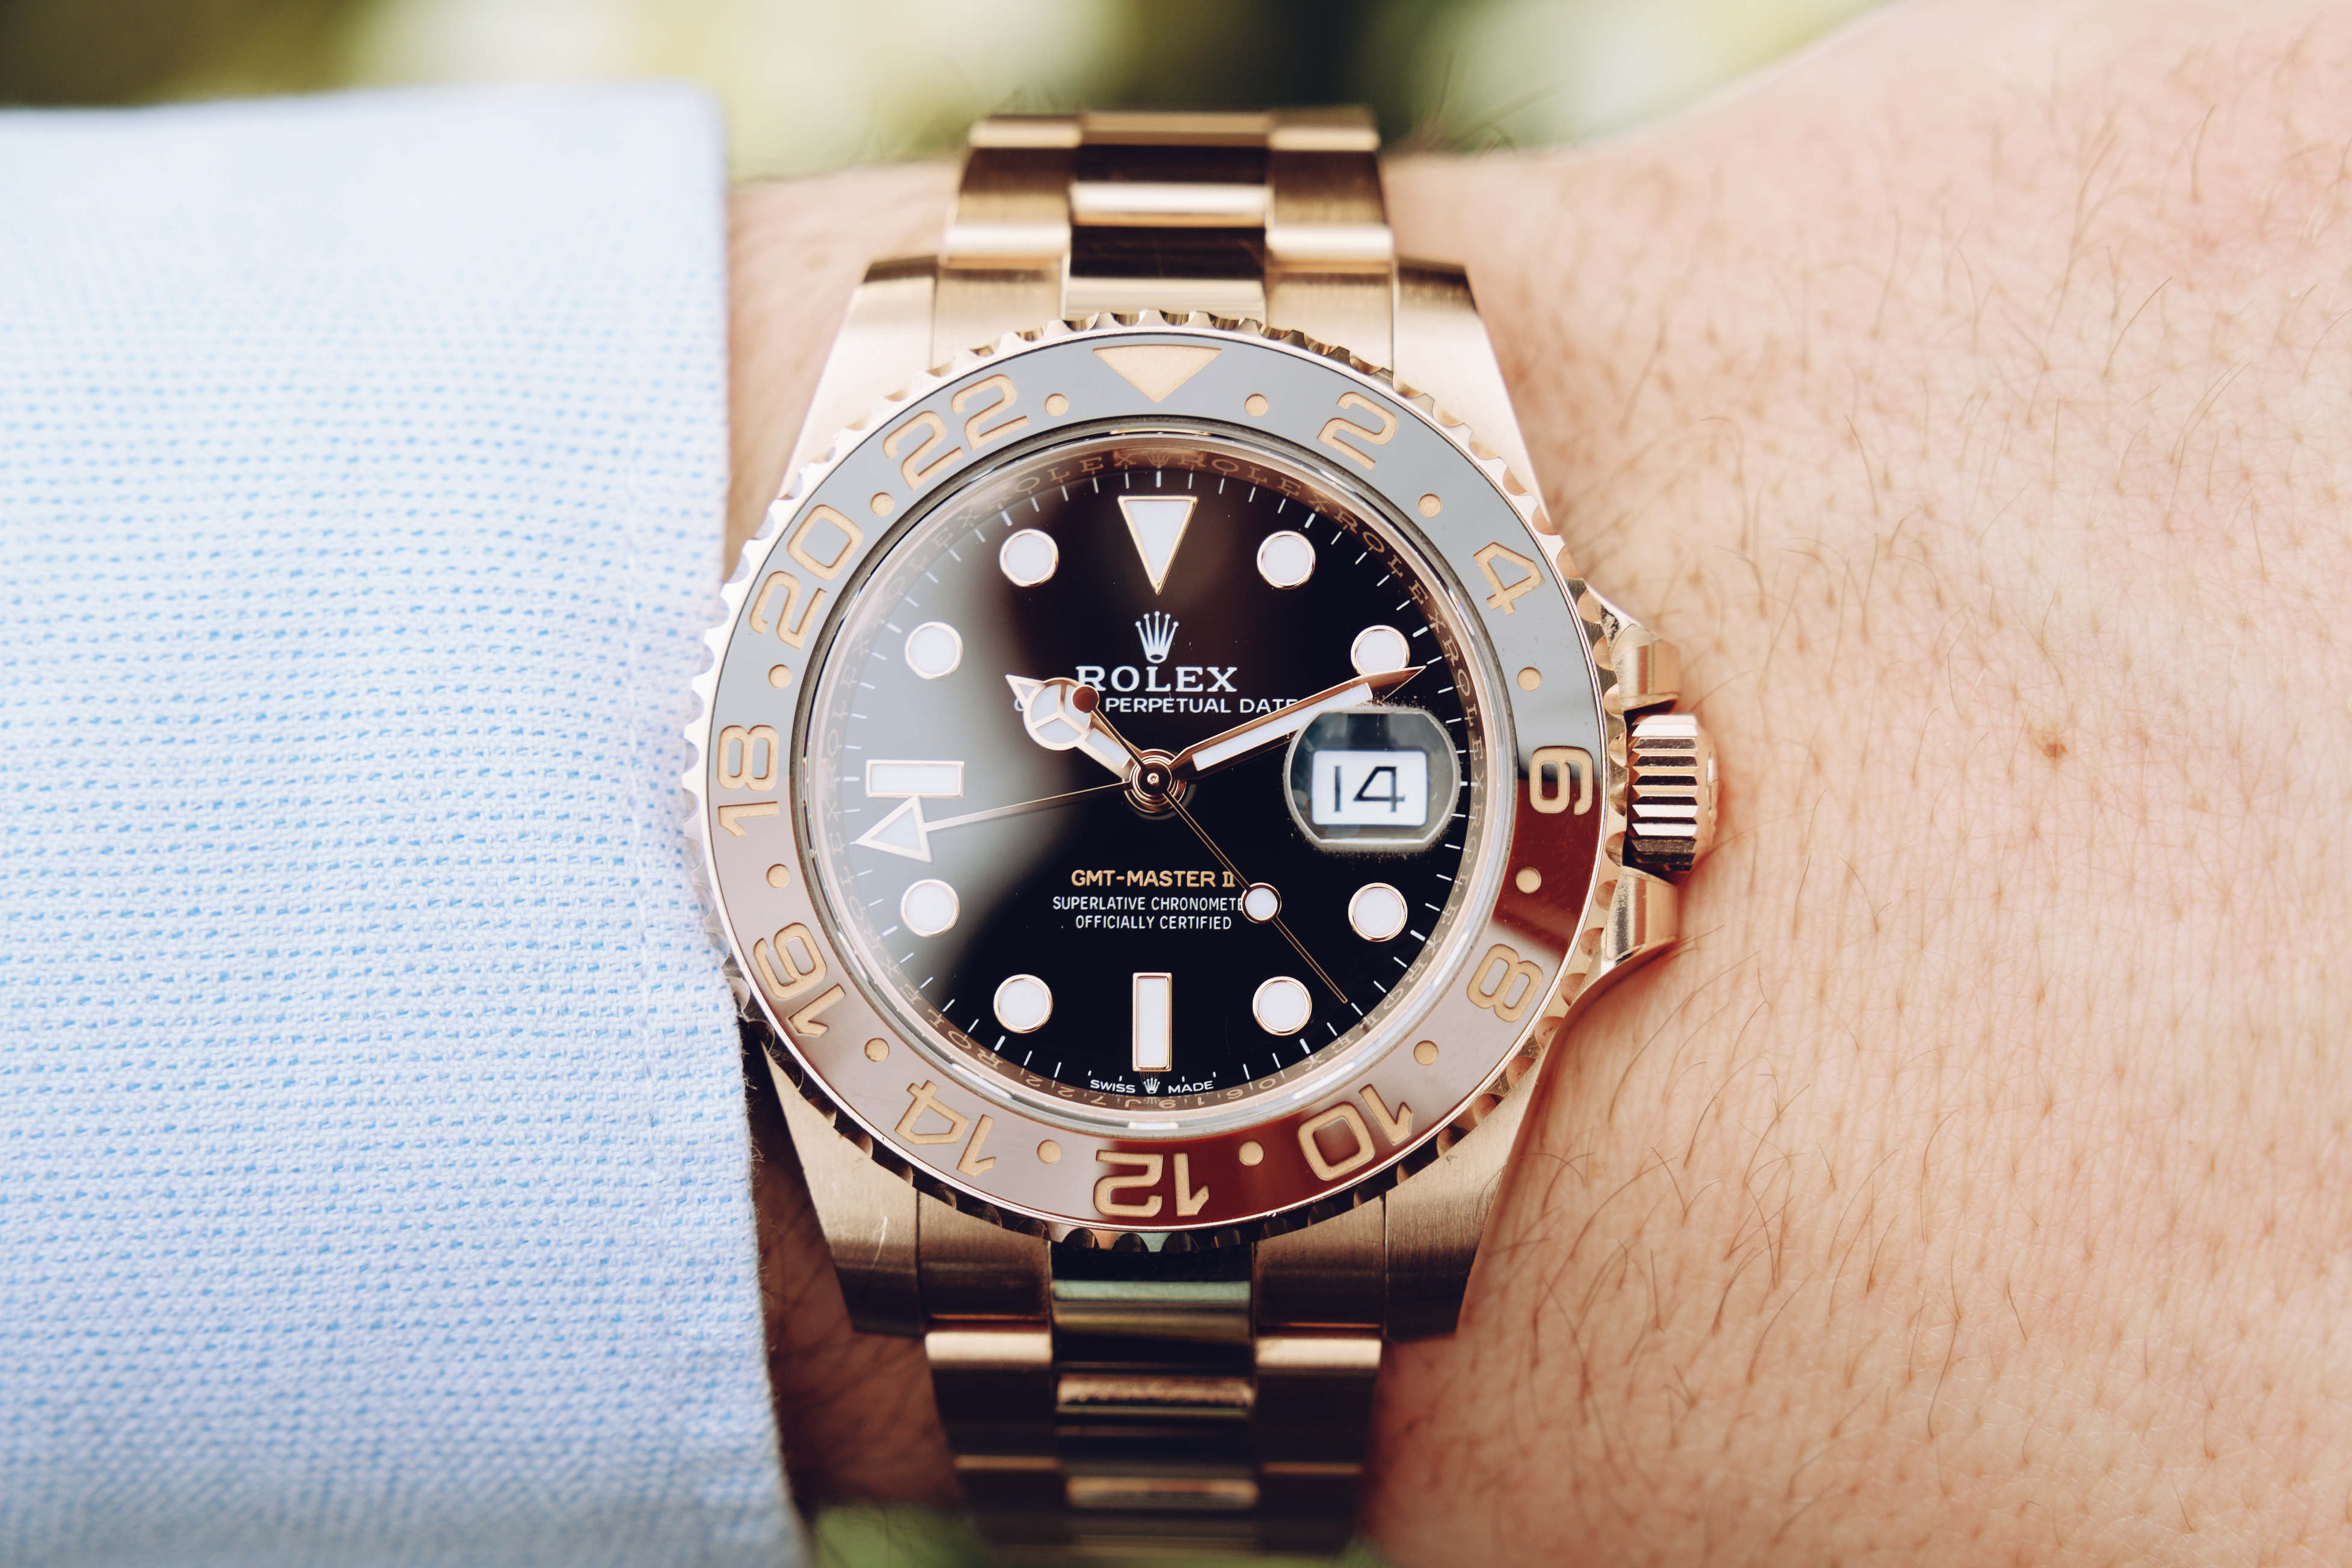 The Best Place To Buy A Rolex Watch And The Reasons Why